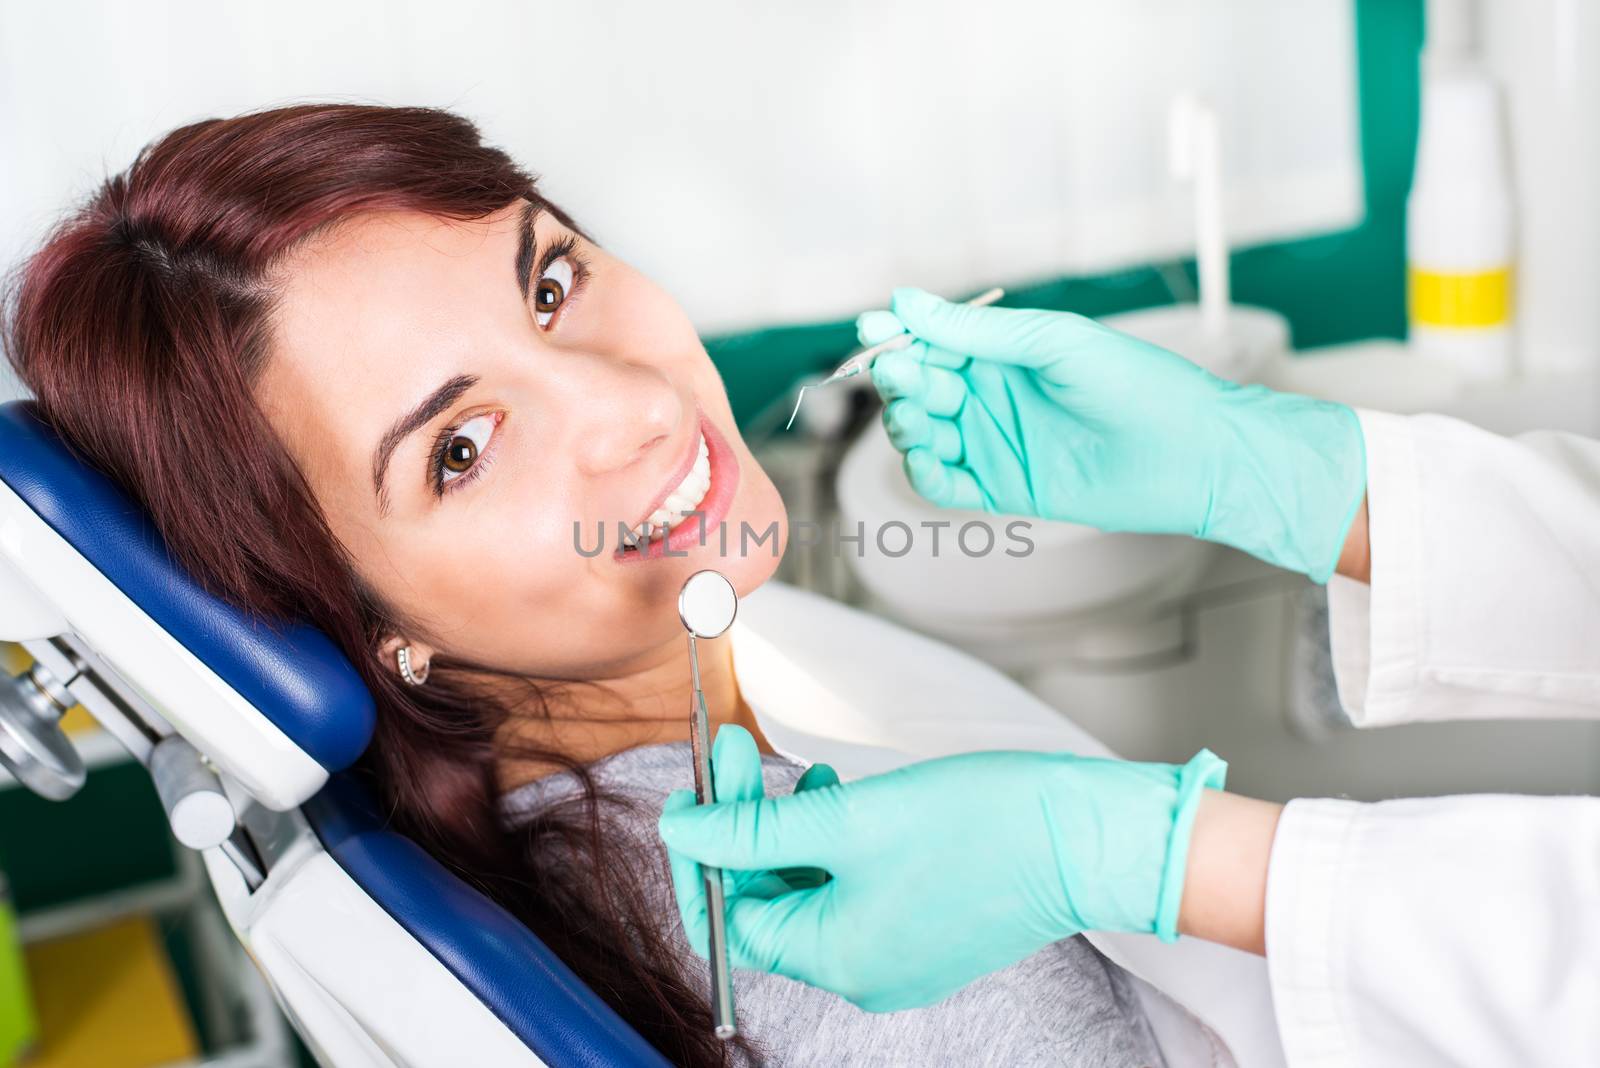 Smiling woman at dentist by MilanMarkovic78